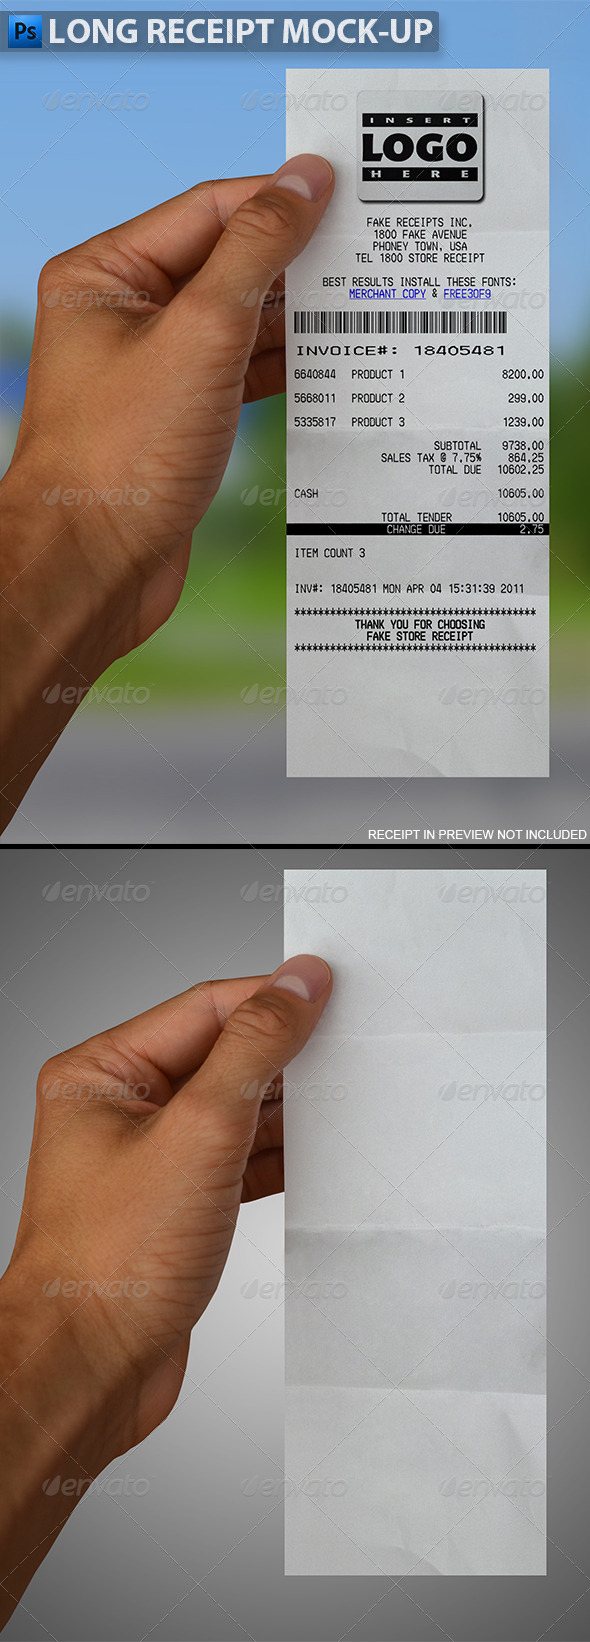 Download Long Receipt In Hand Mock Up By Themedia Graphicriver